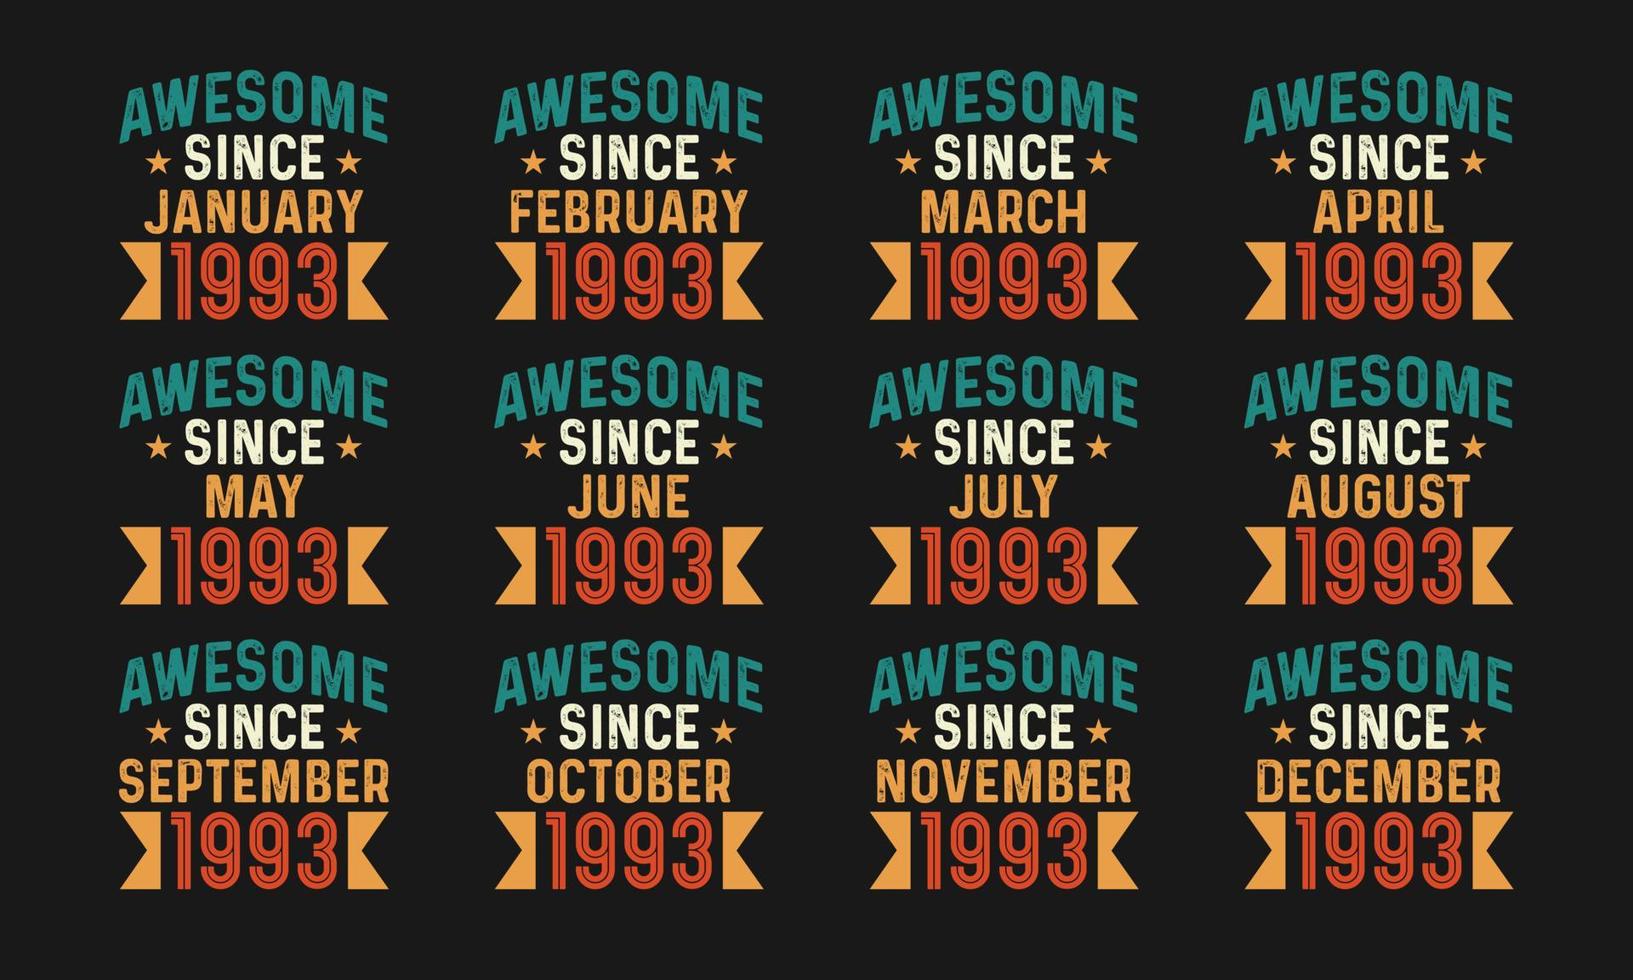 Awesome since January, February, March, April, May, June, July, August, September, October, November, and December 1993. Retro vintage all month in 1993 birthday celebration design pro download vector